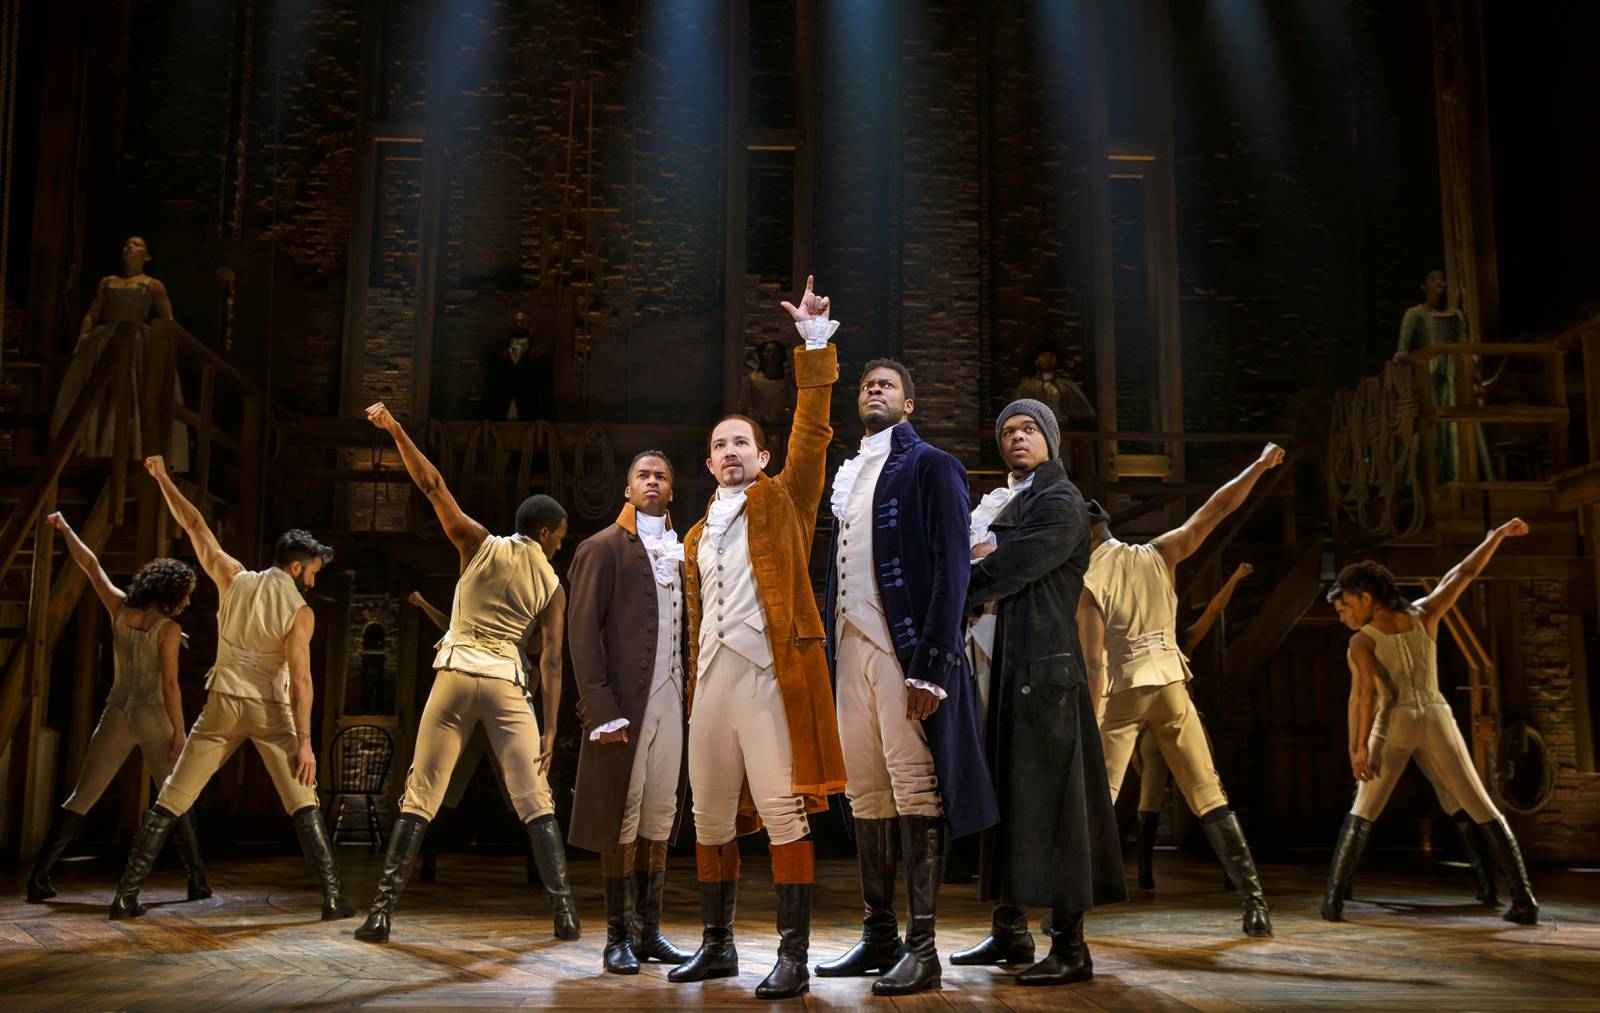 lottery-enter-for-chance-to-win-10-hamilton-tickets-for-jacksonville